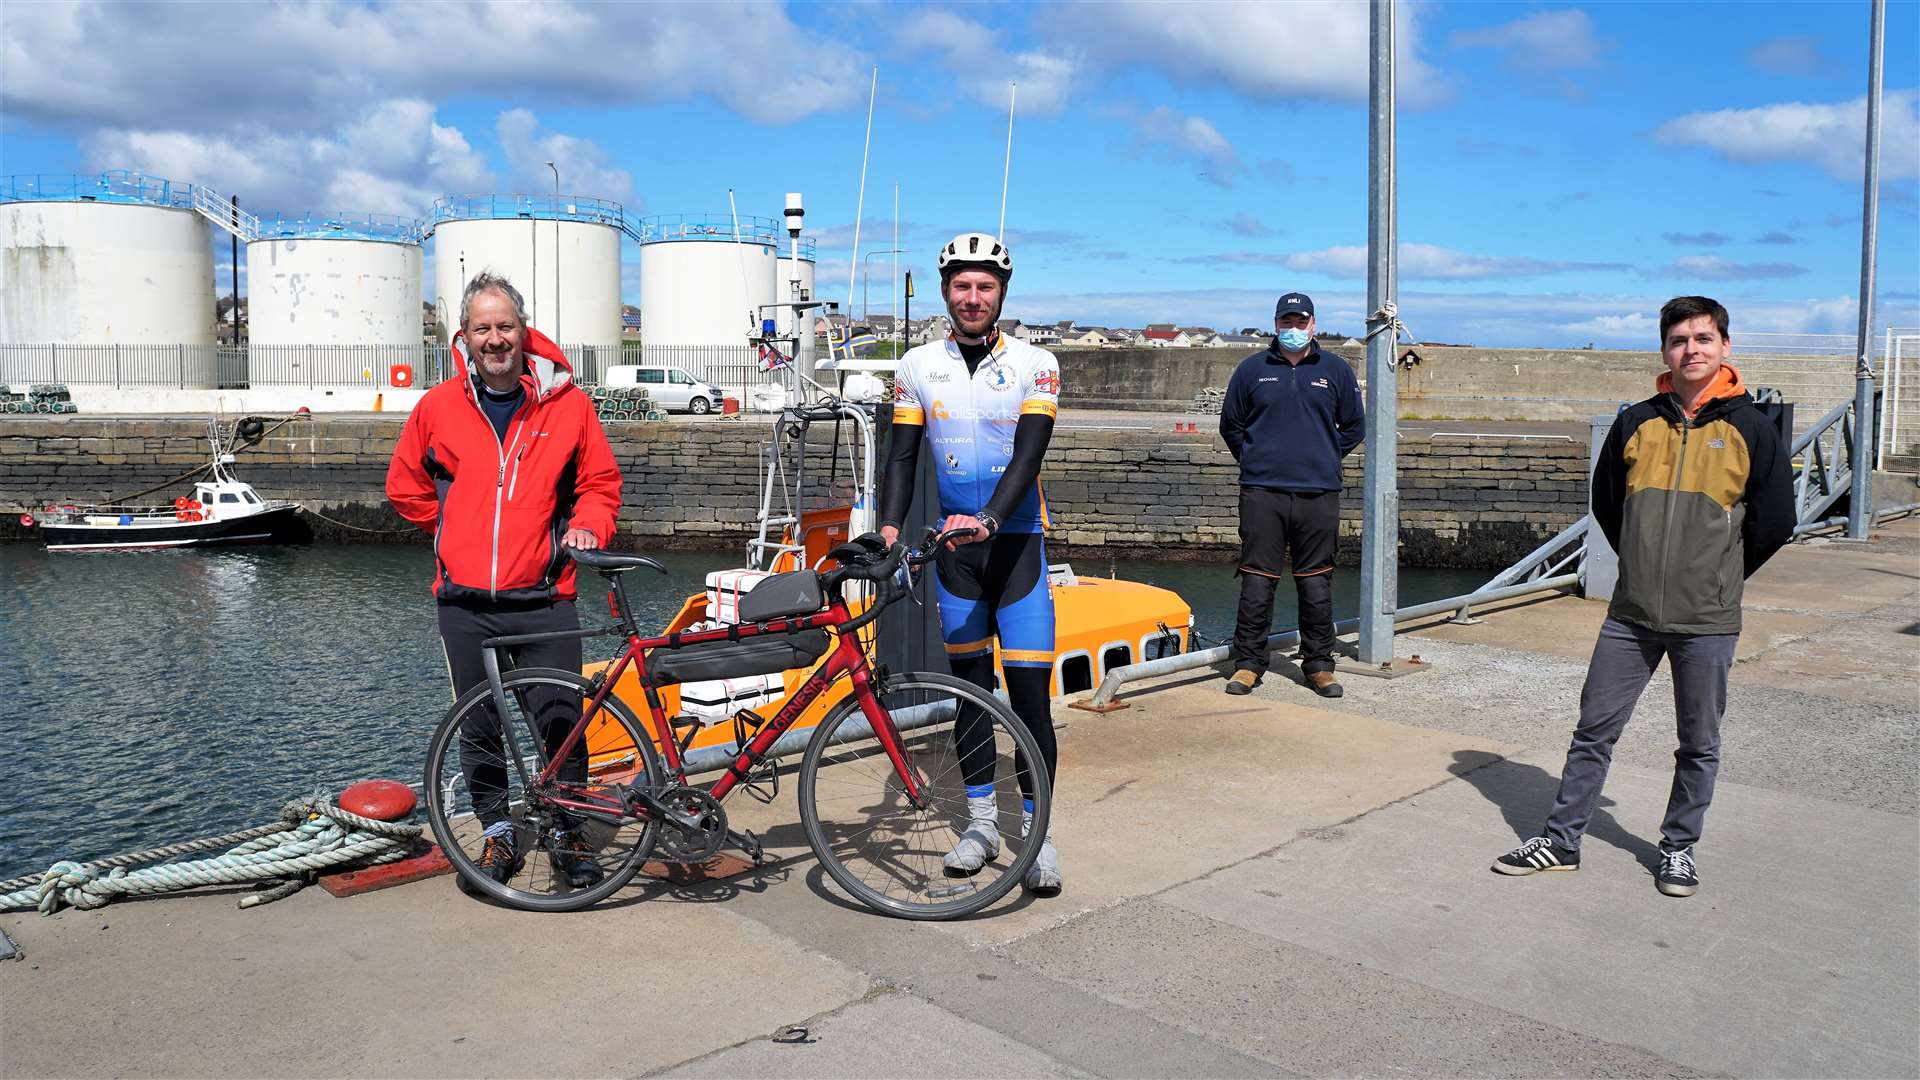 From left, trip sponsor Professor Iain Baikie, cyclist Harry Lidgley, Wick lifeboat mechanic Johnny Grant representing the rest of the crew and Professor Baikie's son Joni who knew Harry from Cambridge University. Picture: DGS